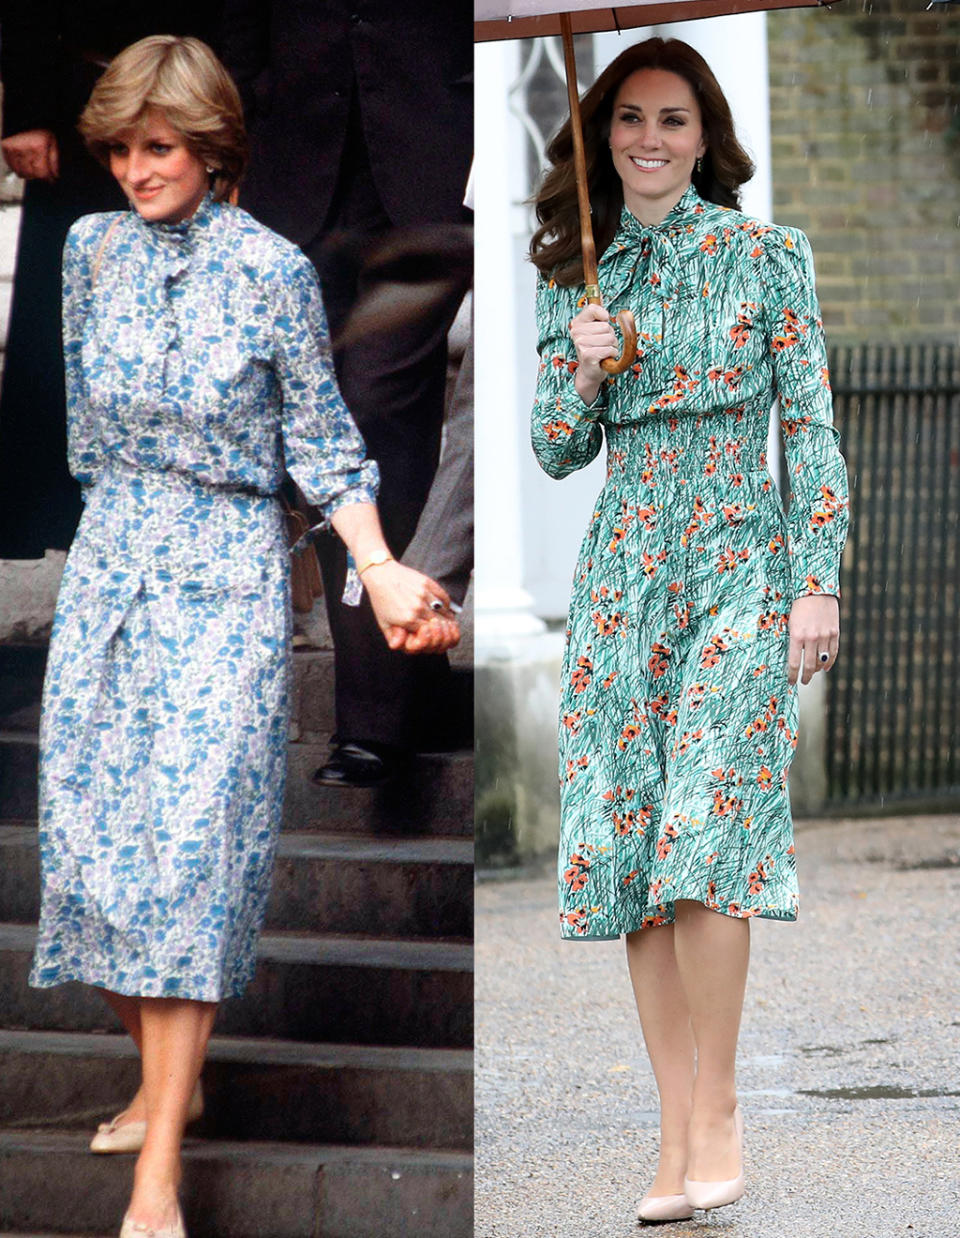 Kate Middleton channeled her late mother-in-law with a floral dress. (Photo: Getty Images)